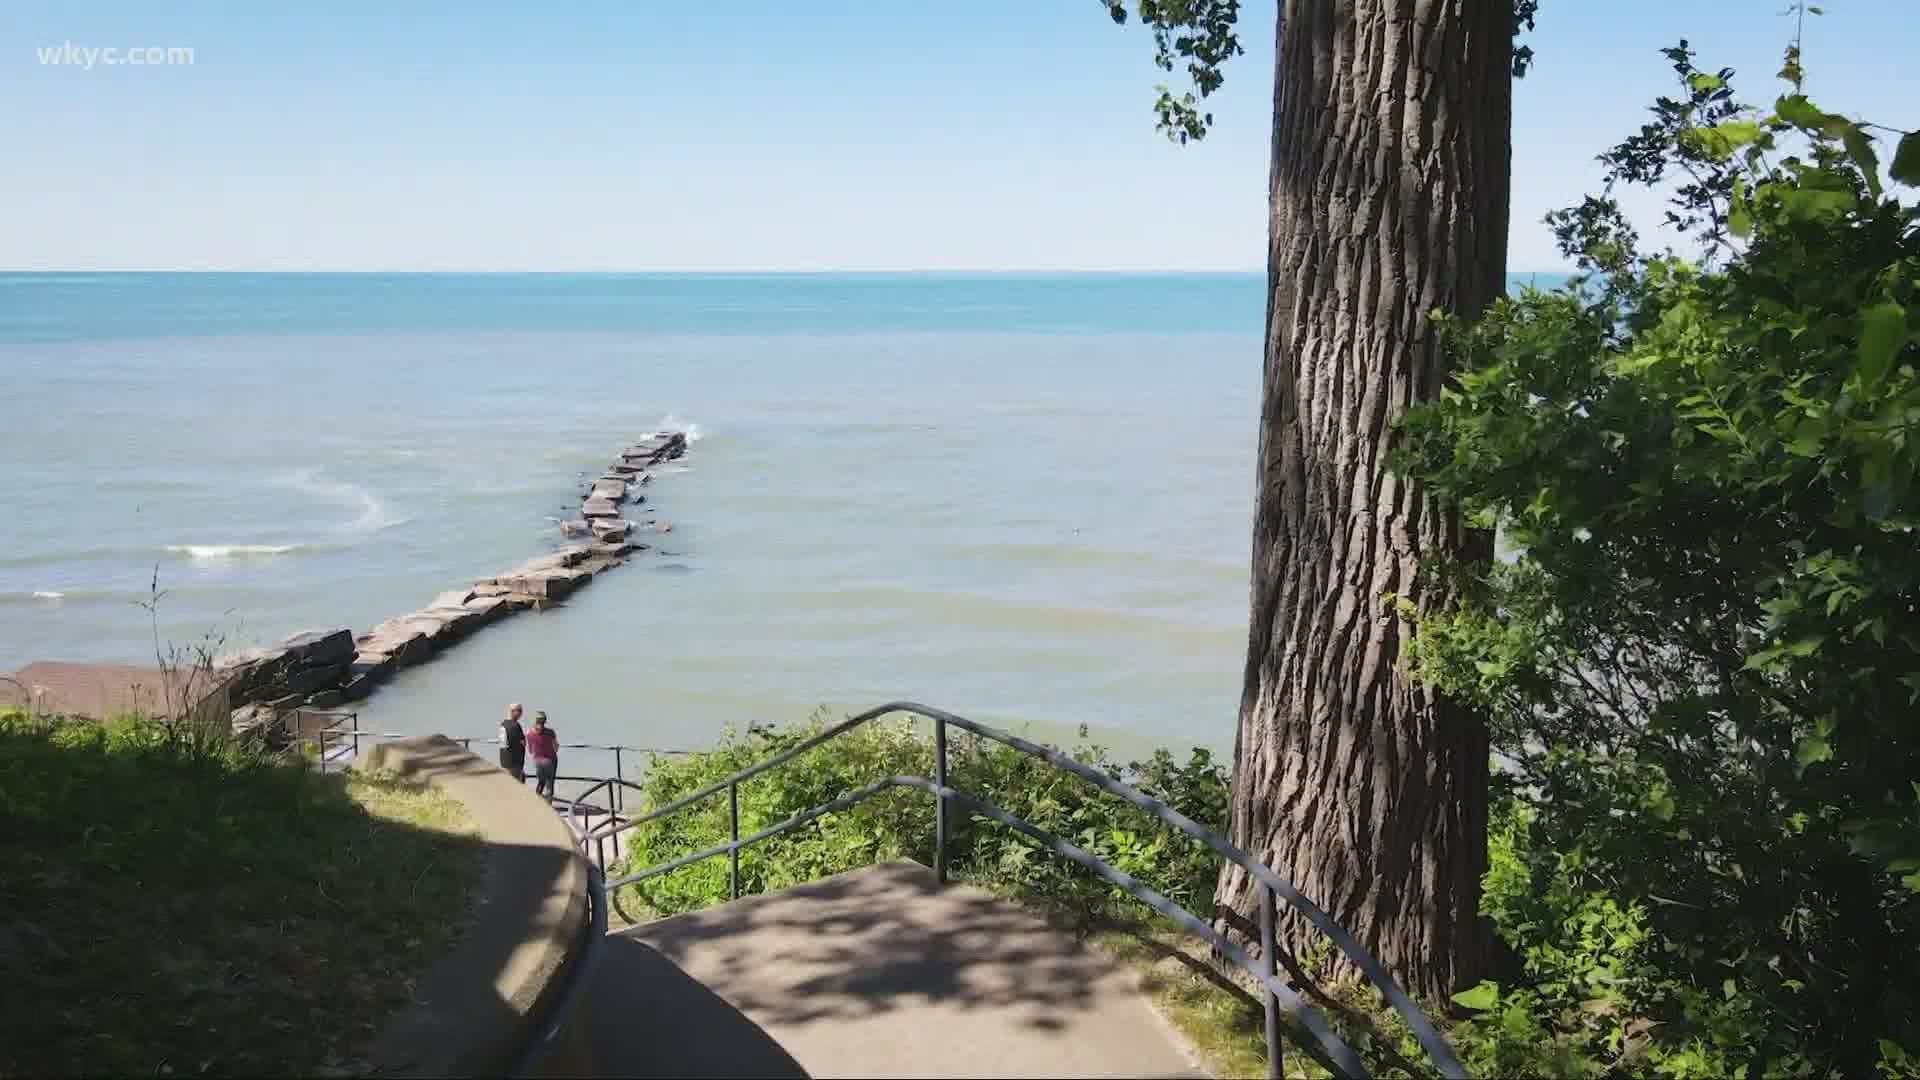 Check out some of the coolest places along the shores of Lake Erie!